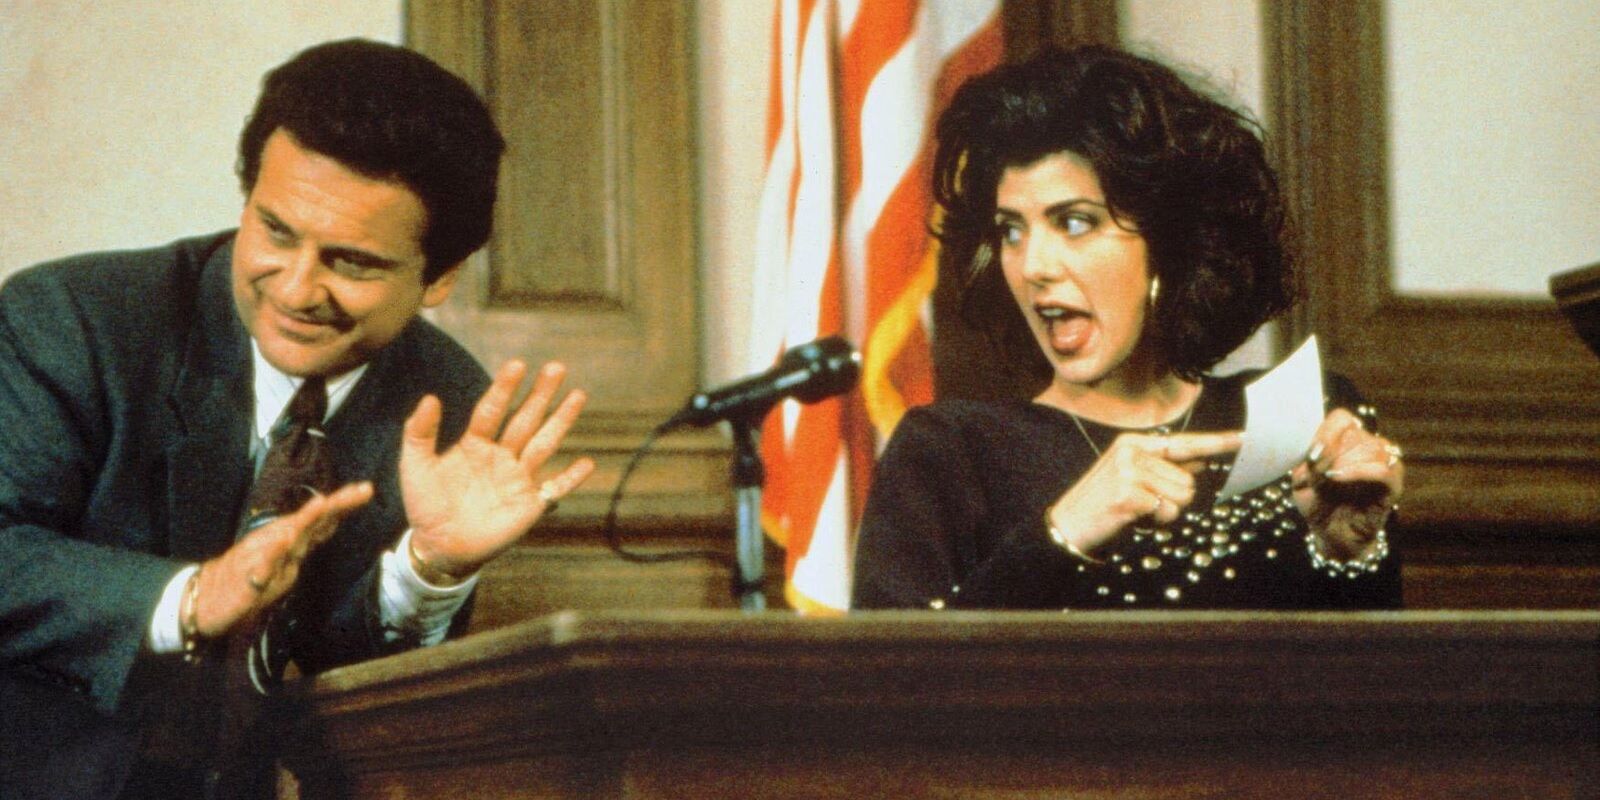 Joe Pesci and Marisa Tomei in court in My Cousin Vinny